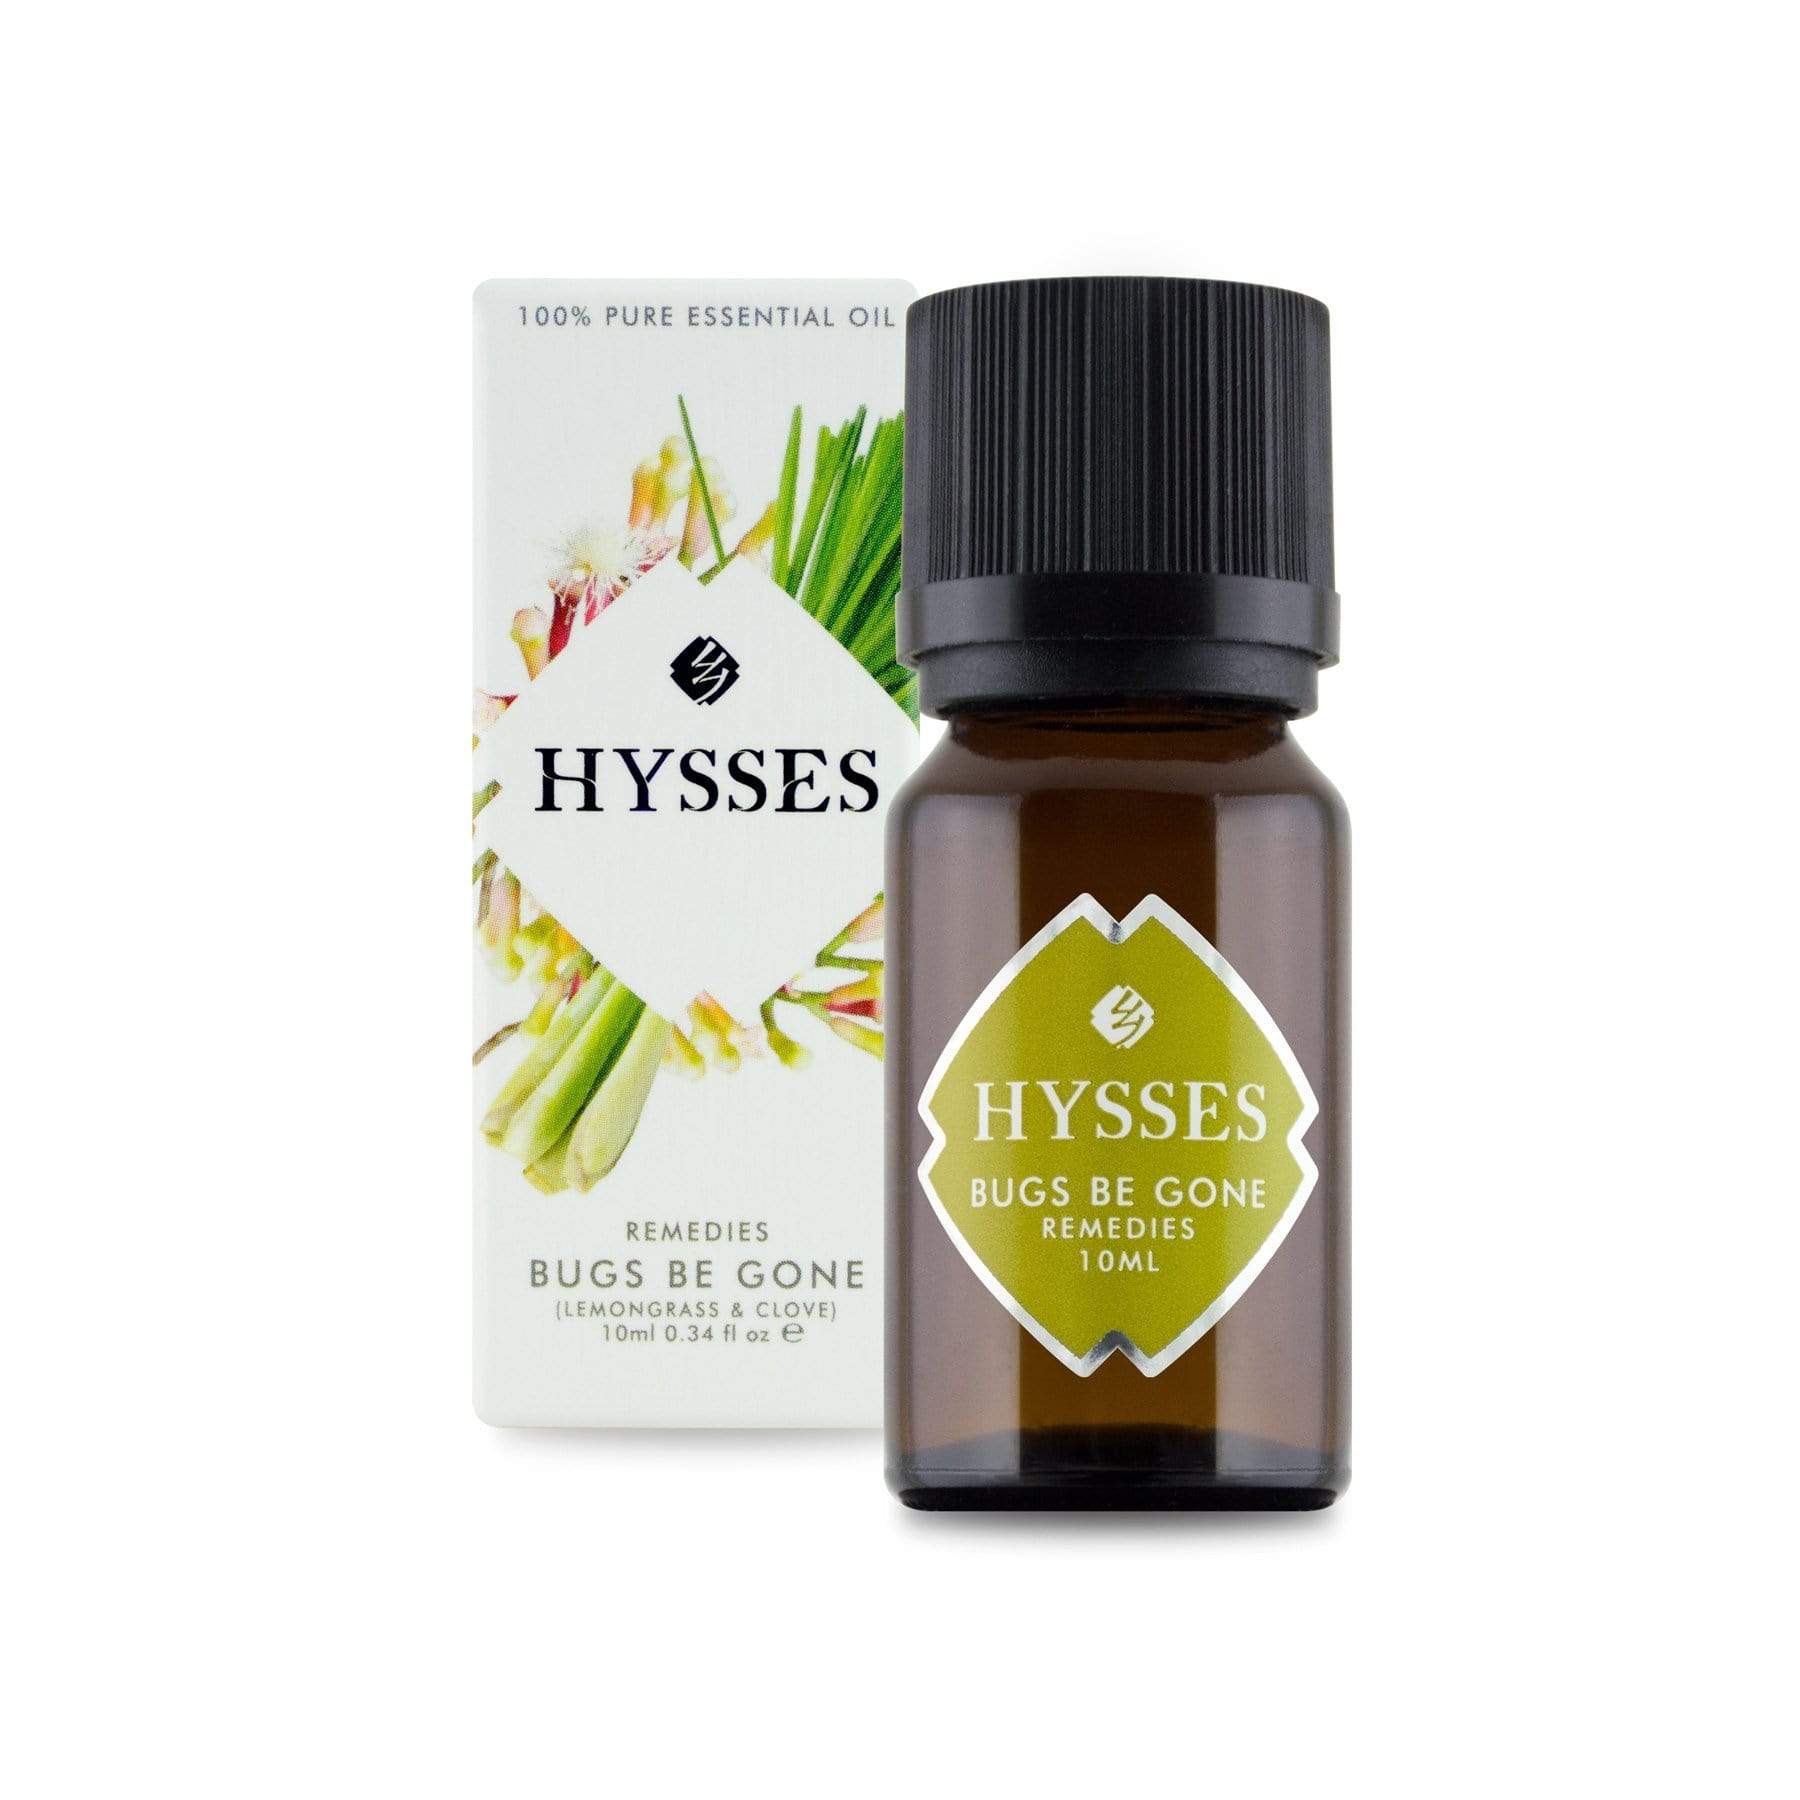 Hysses Essential Oil Remedies, Bugs Be Gone, 10ml